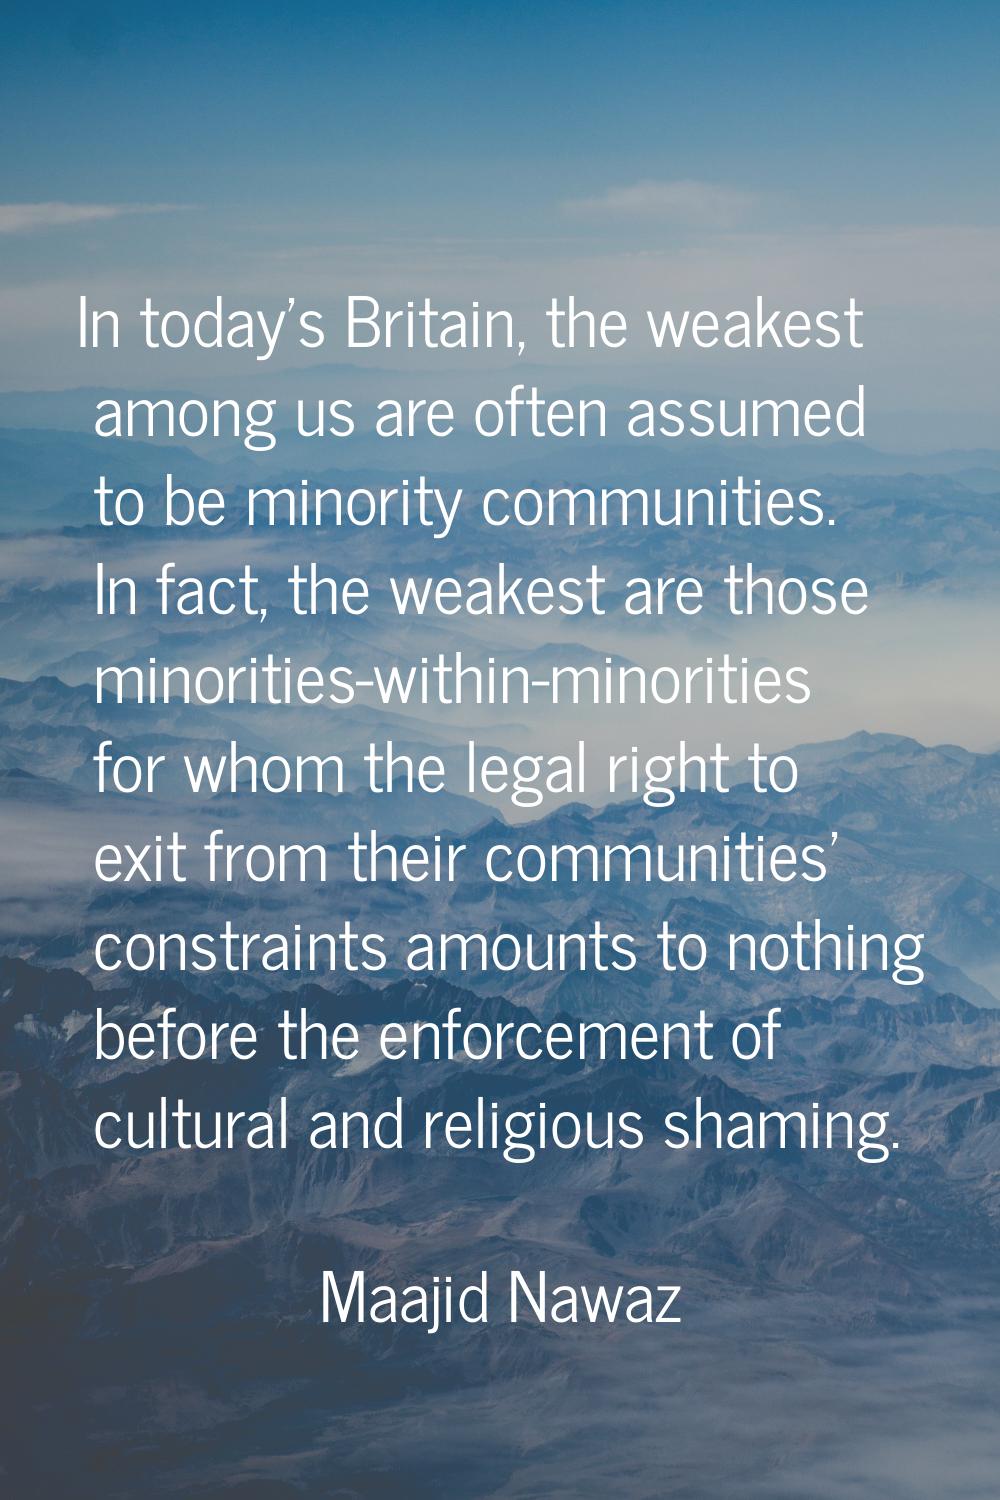 In today's Britain, the weakest among us are often assumed to be minority communities. In fact, the